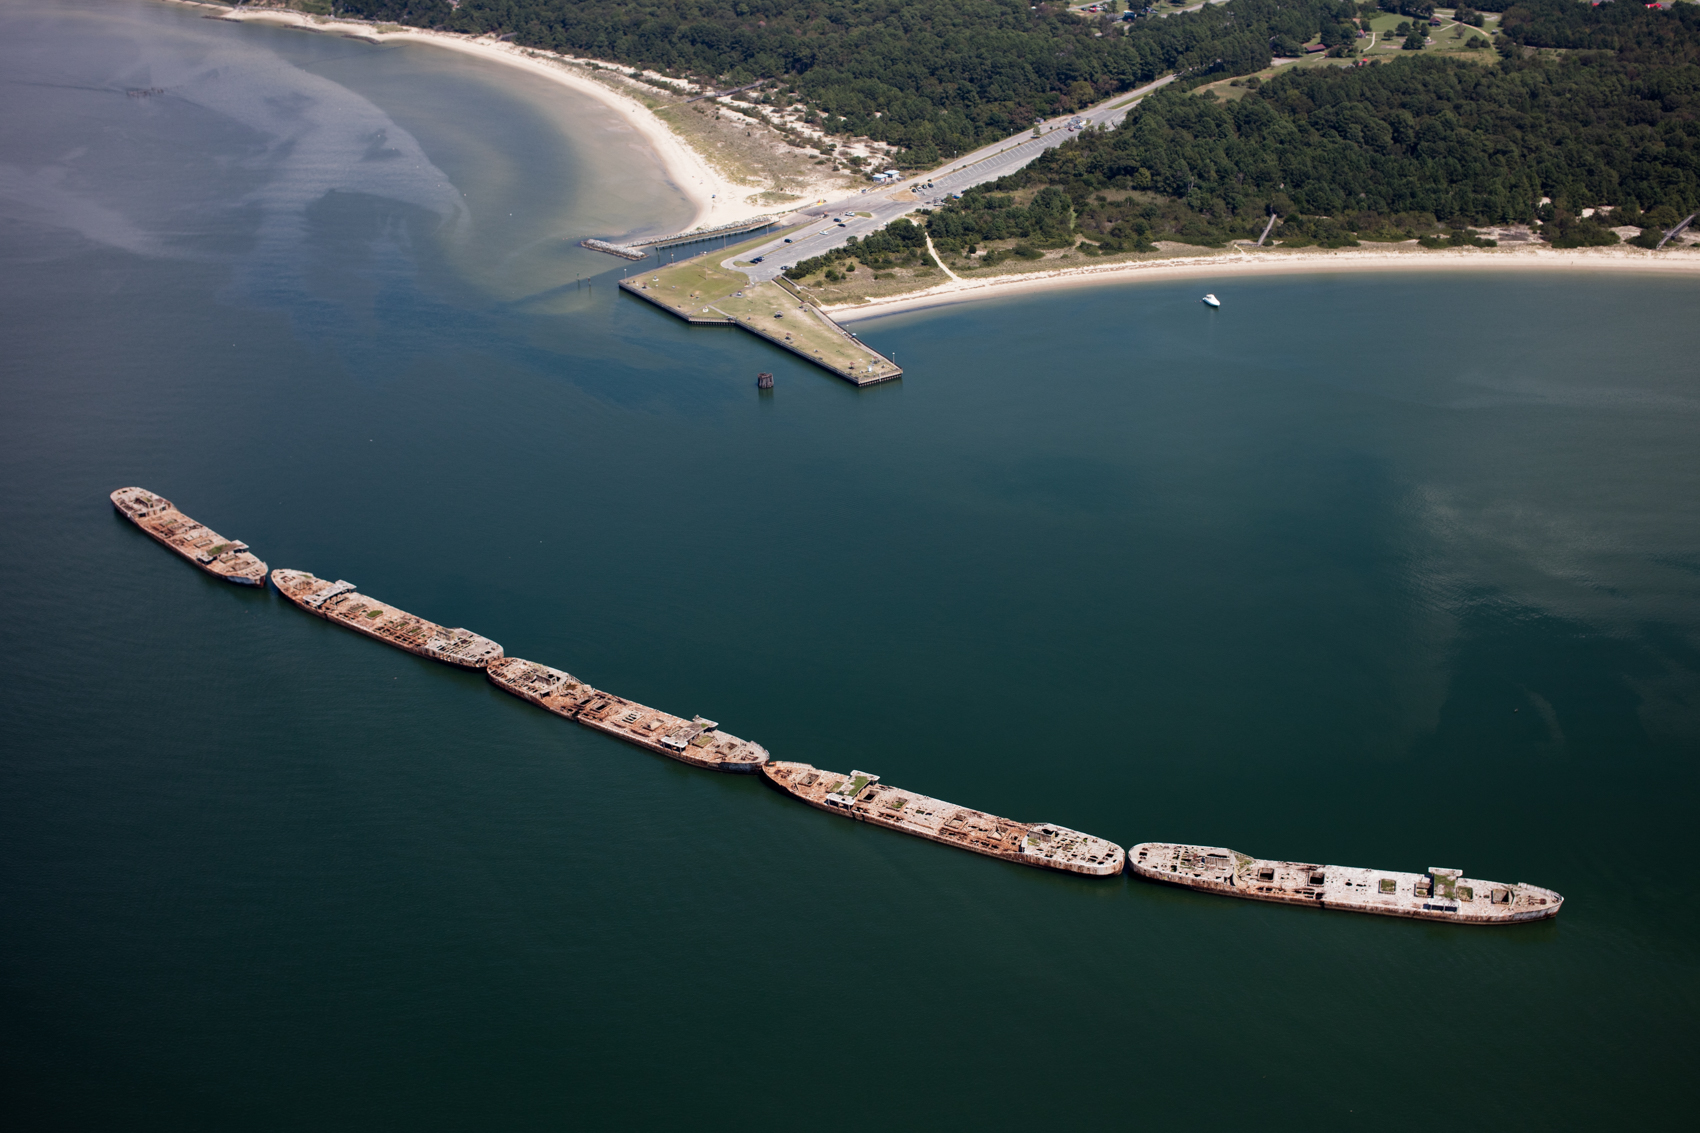 Concrete ships built during World War II steel shortages were sunk in 1948 to provide a breakwater for the Cape Charles, Virginia ferry port. The ferry no longer runs, but the ships continue to shelter the pier and shoreline.